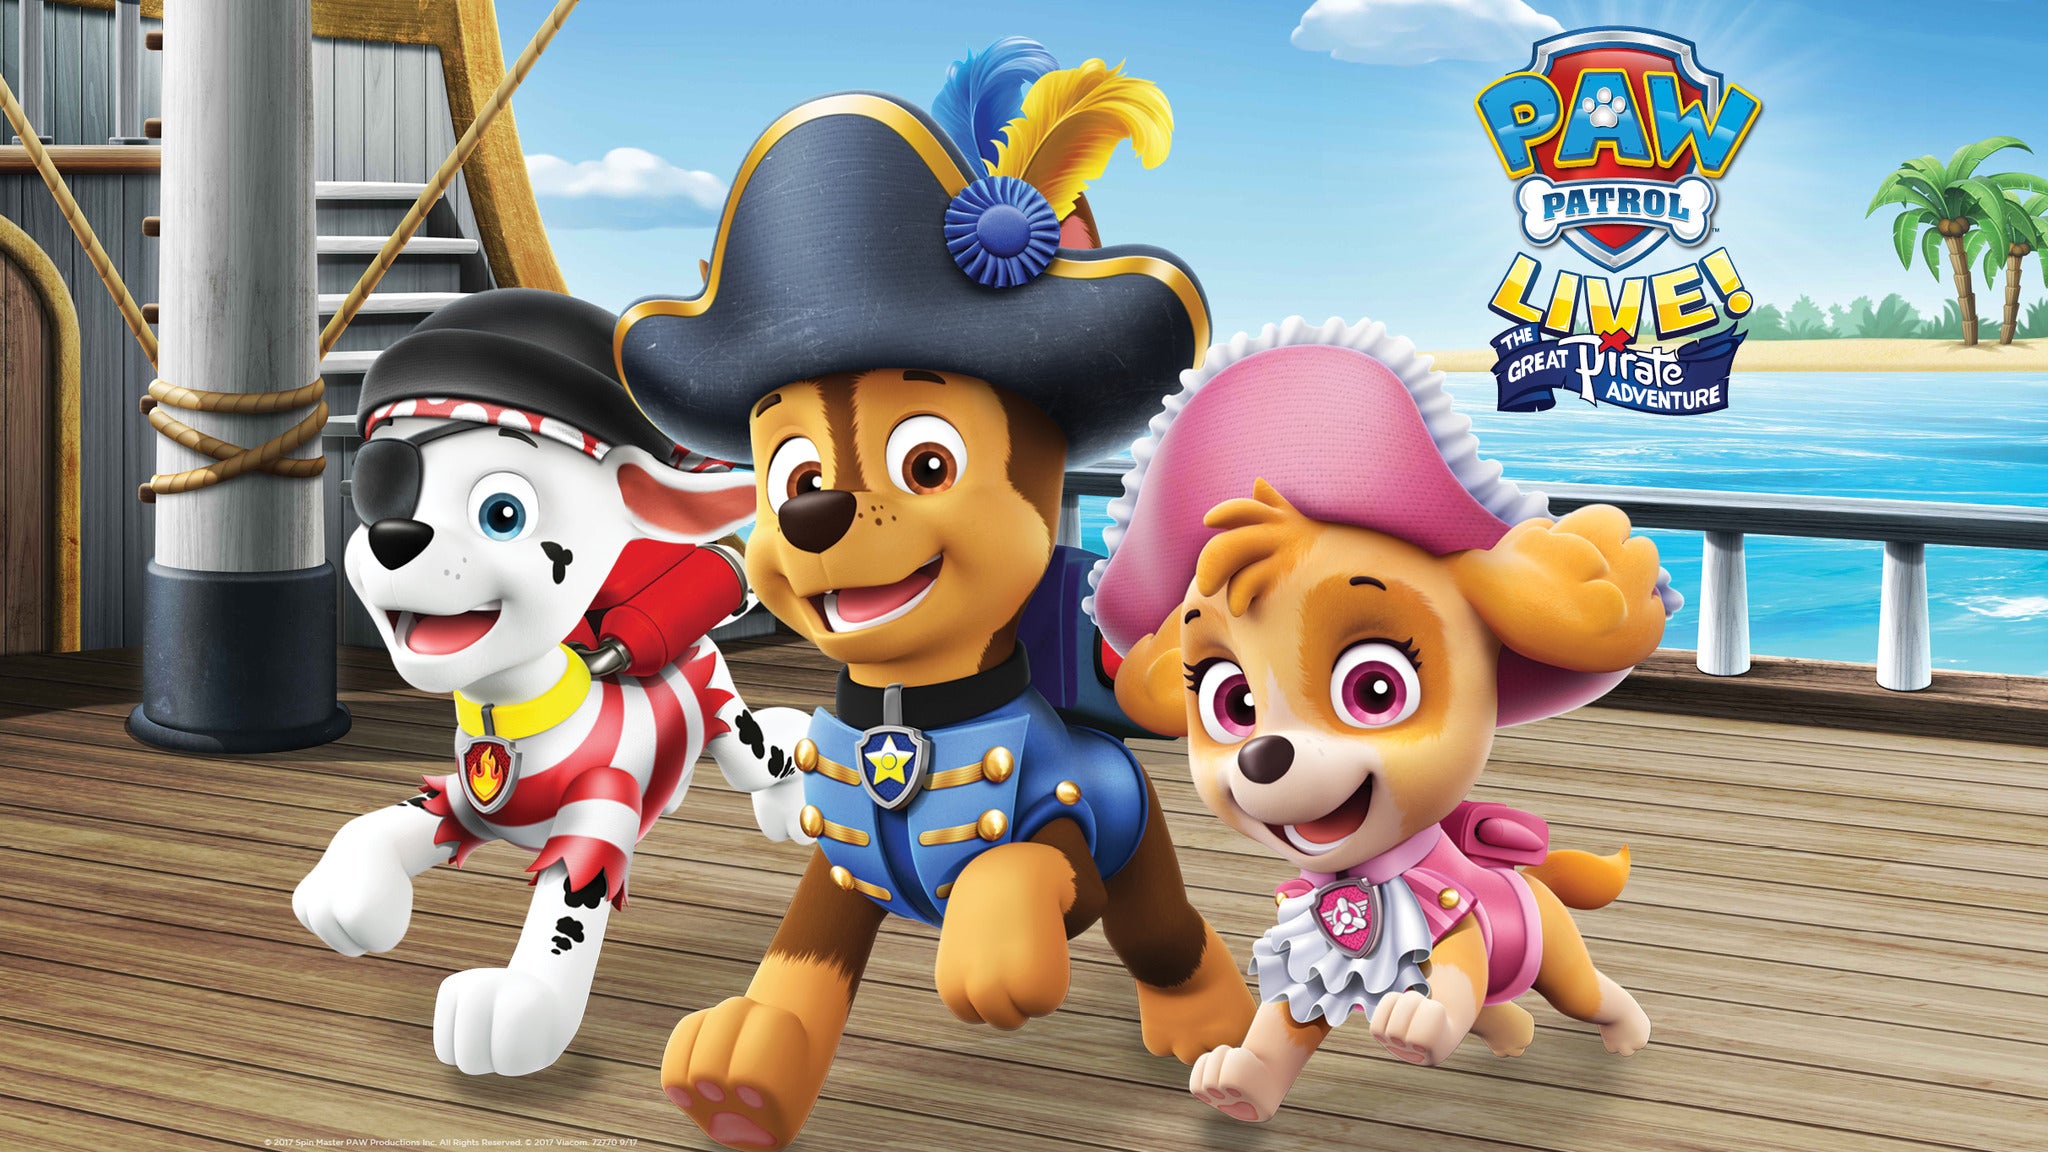 PAW Patrol Live! The Great Pirate Adventure in New Orleans promo photo for Citi® Cardmember presale offer code